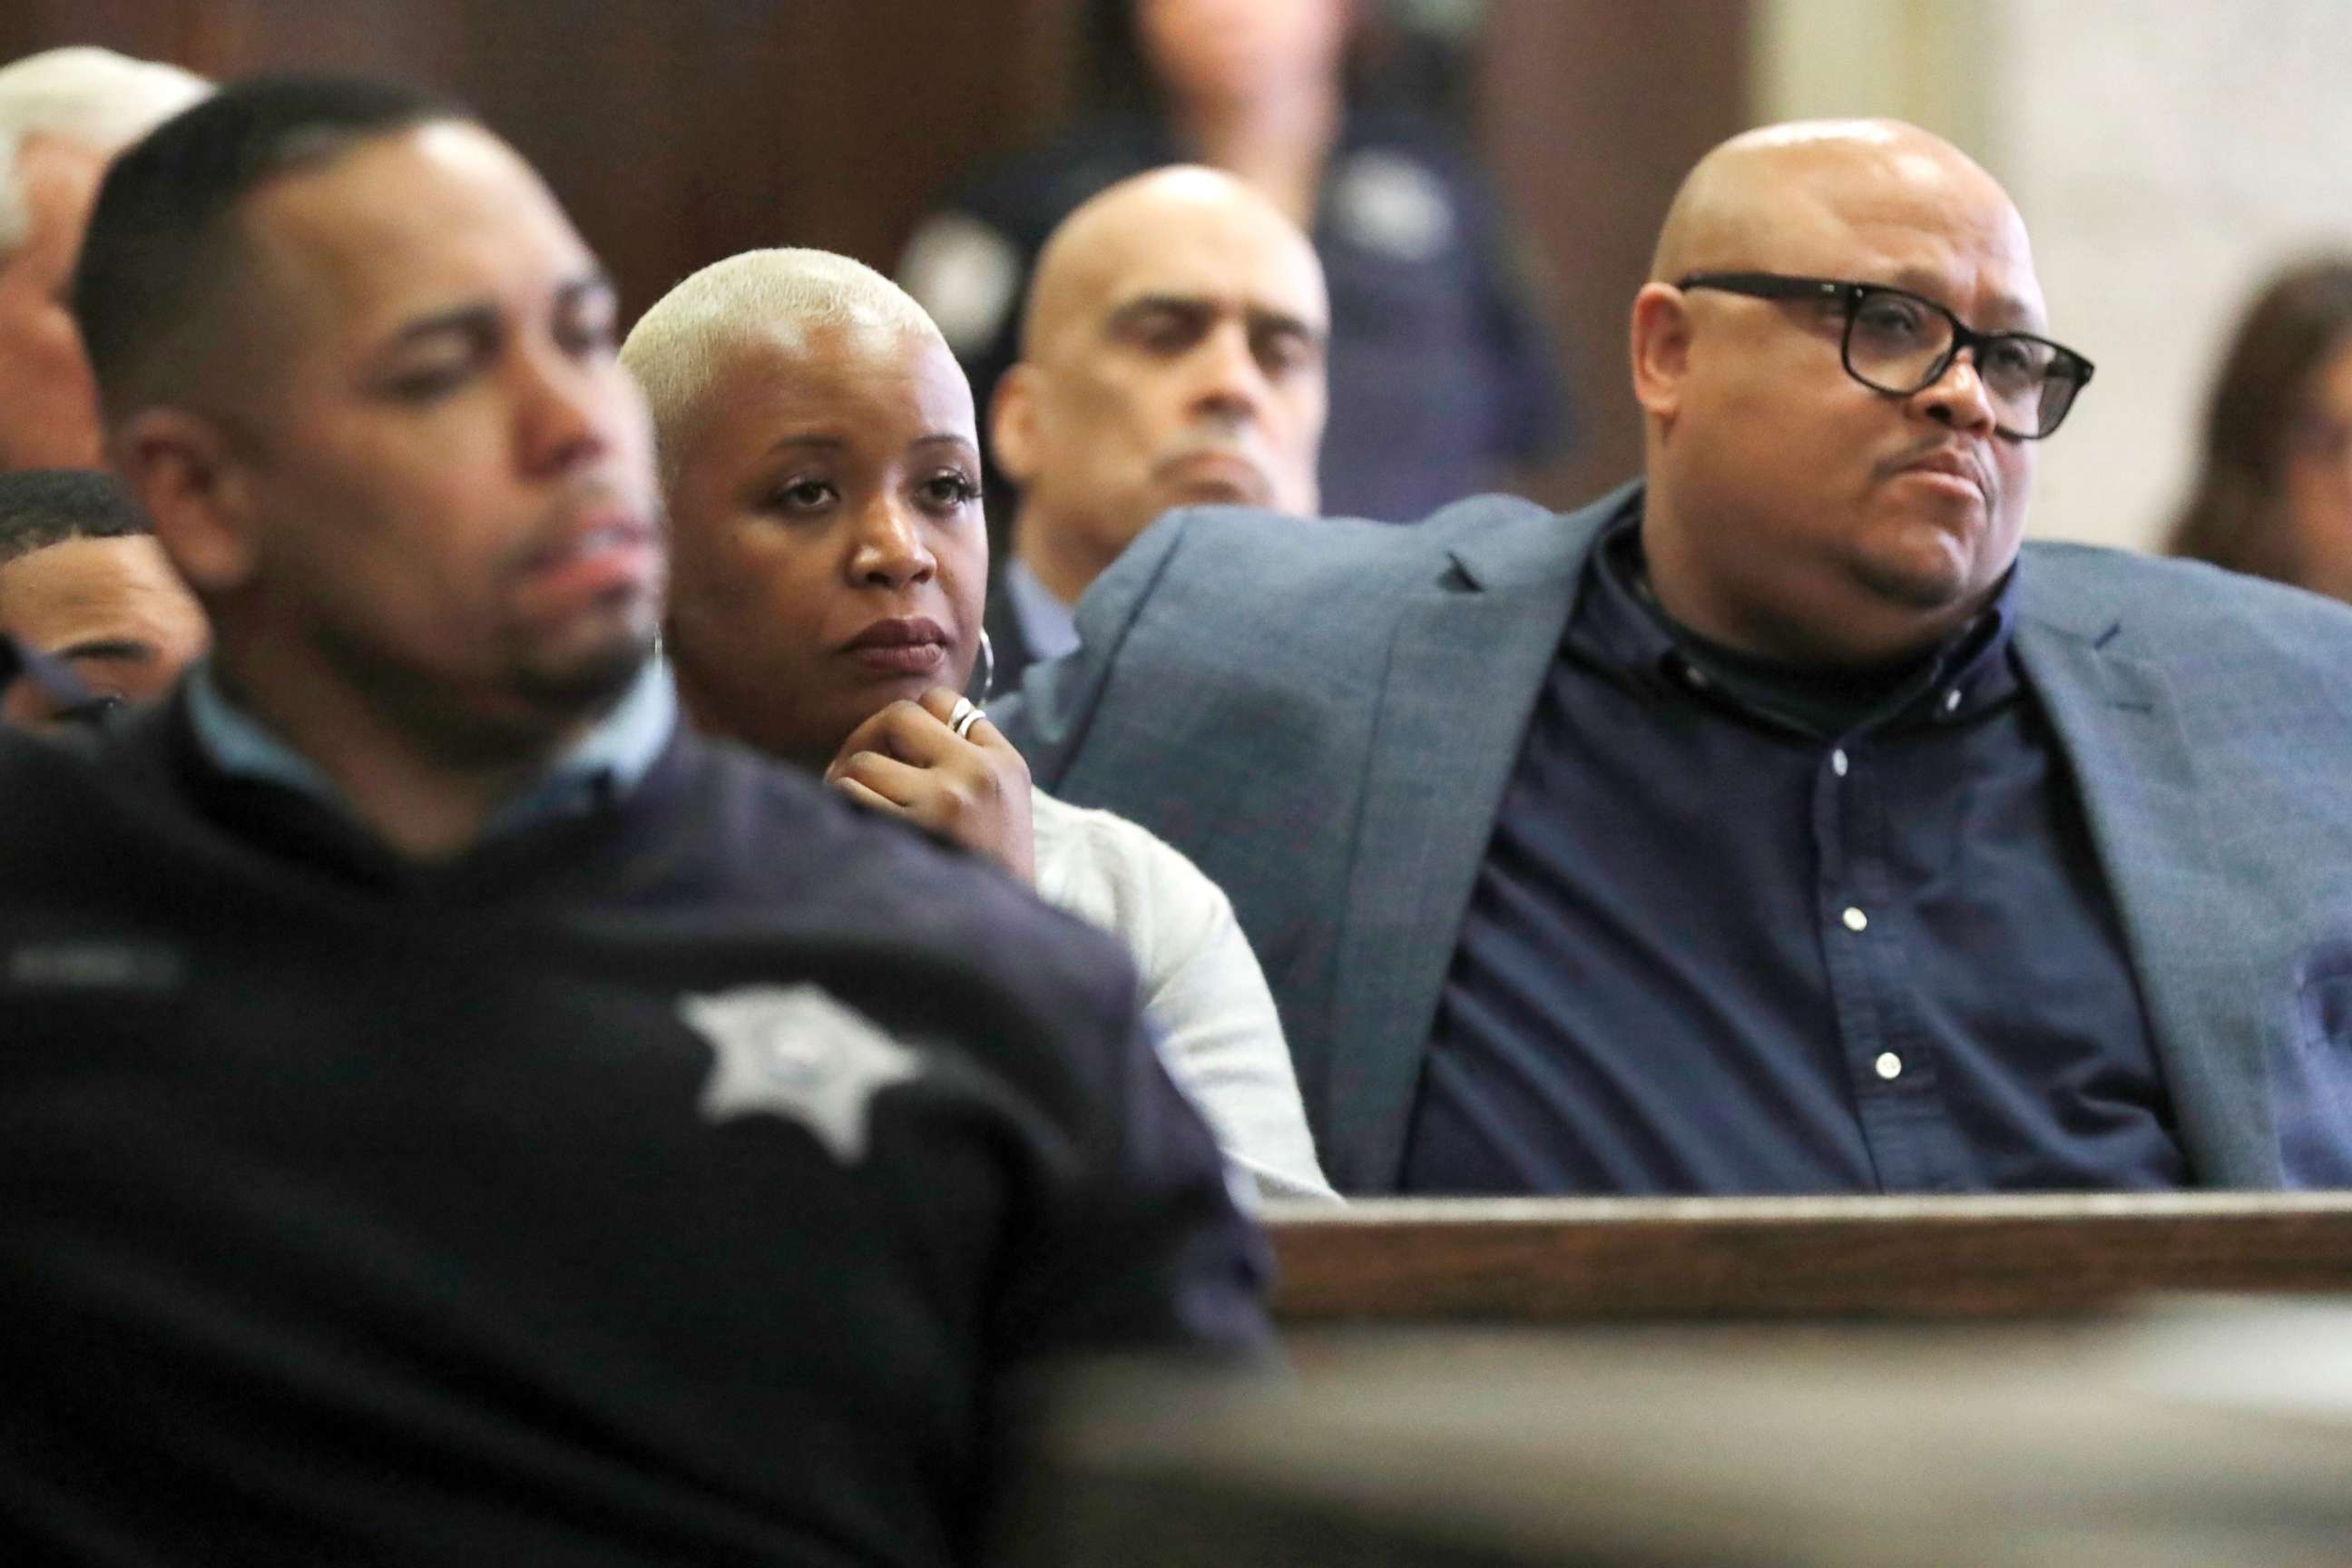 PHOTO: Cleopatra Cowley and Nathaniel Pendleton Sr., parents of Hadiya Pendleton, listen during the sentencing hearing of Micheail Ward at the Leighton Criminal Court Building in Chicago, Jan. 14, 2019 in Chicago.